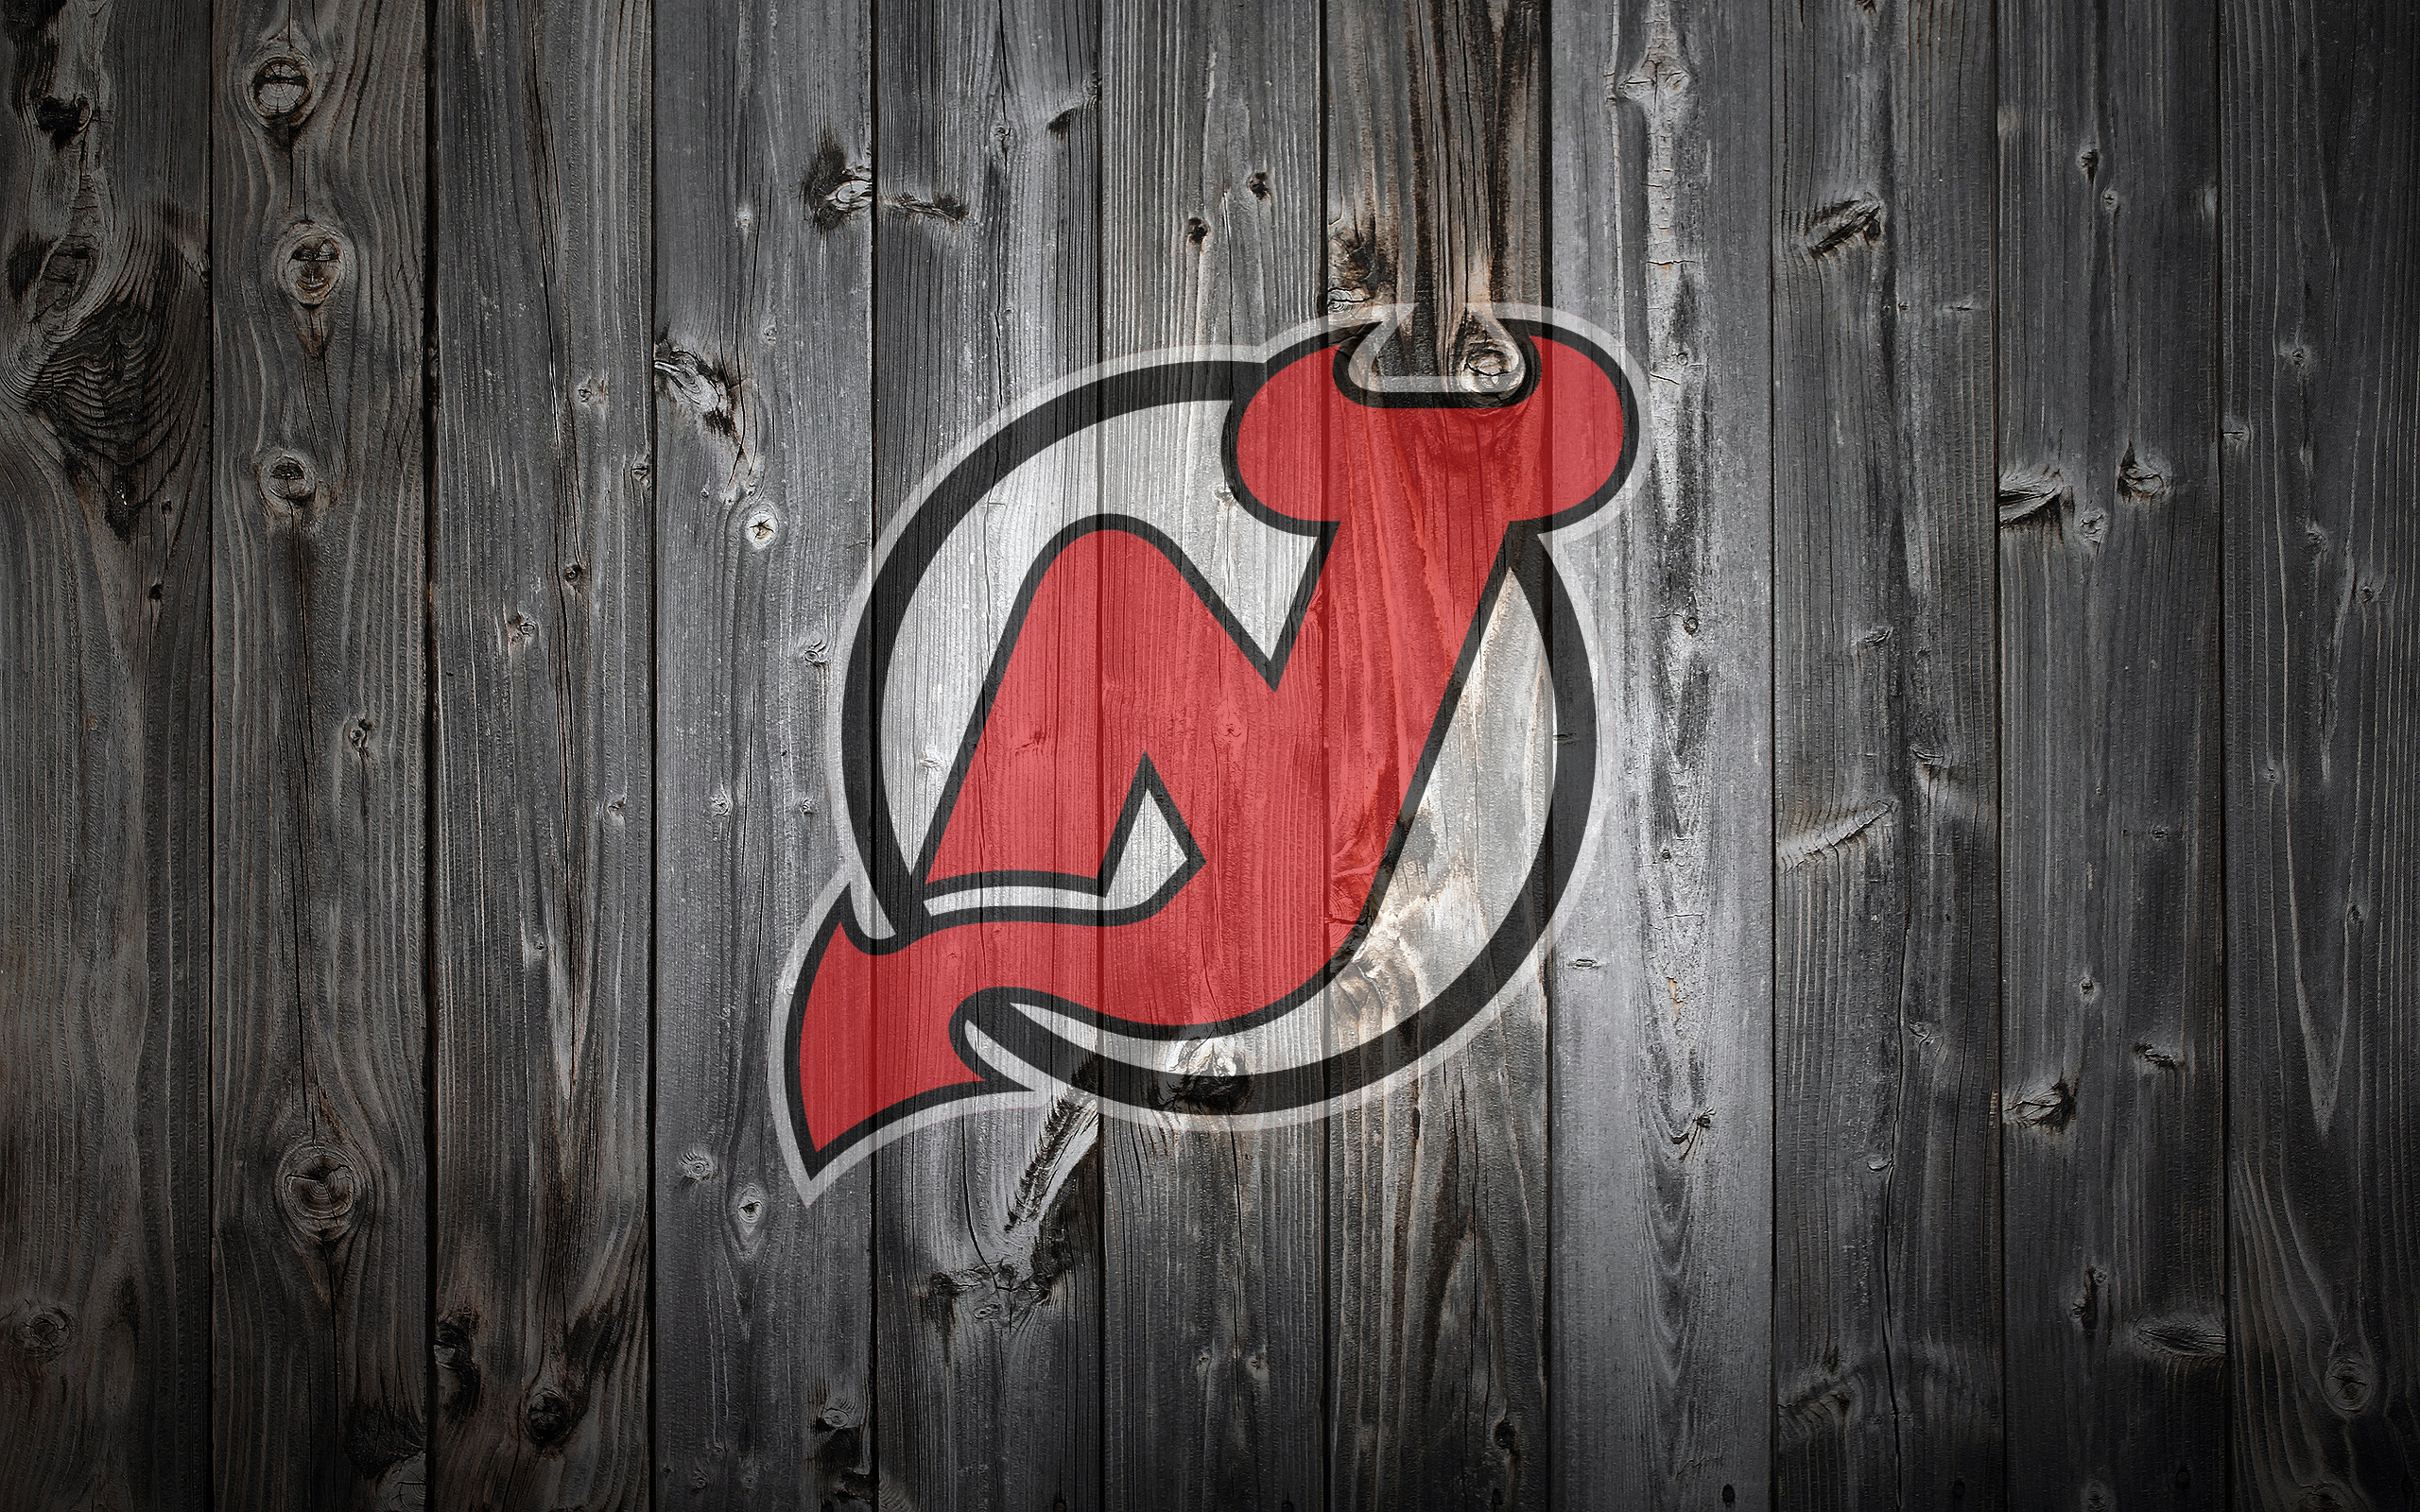 New Jersey Devils Or Even Videos Related To